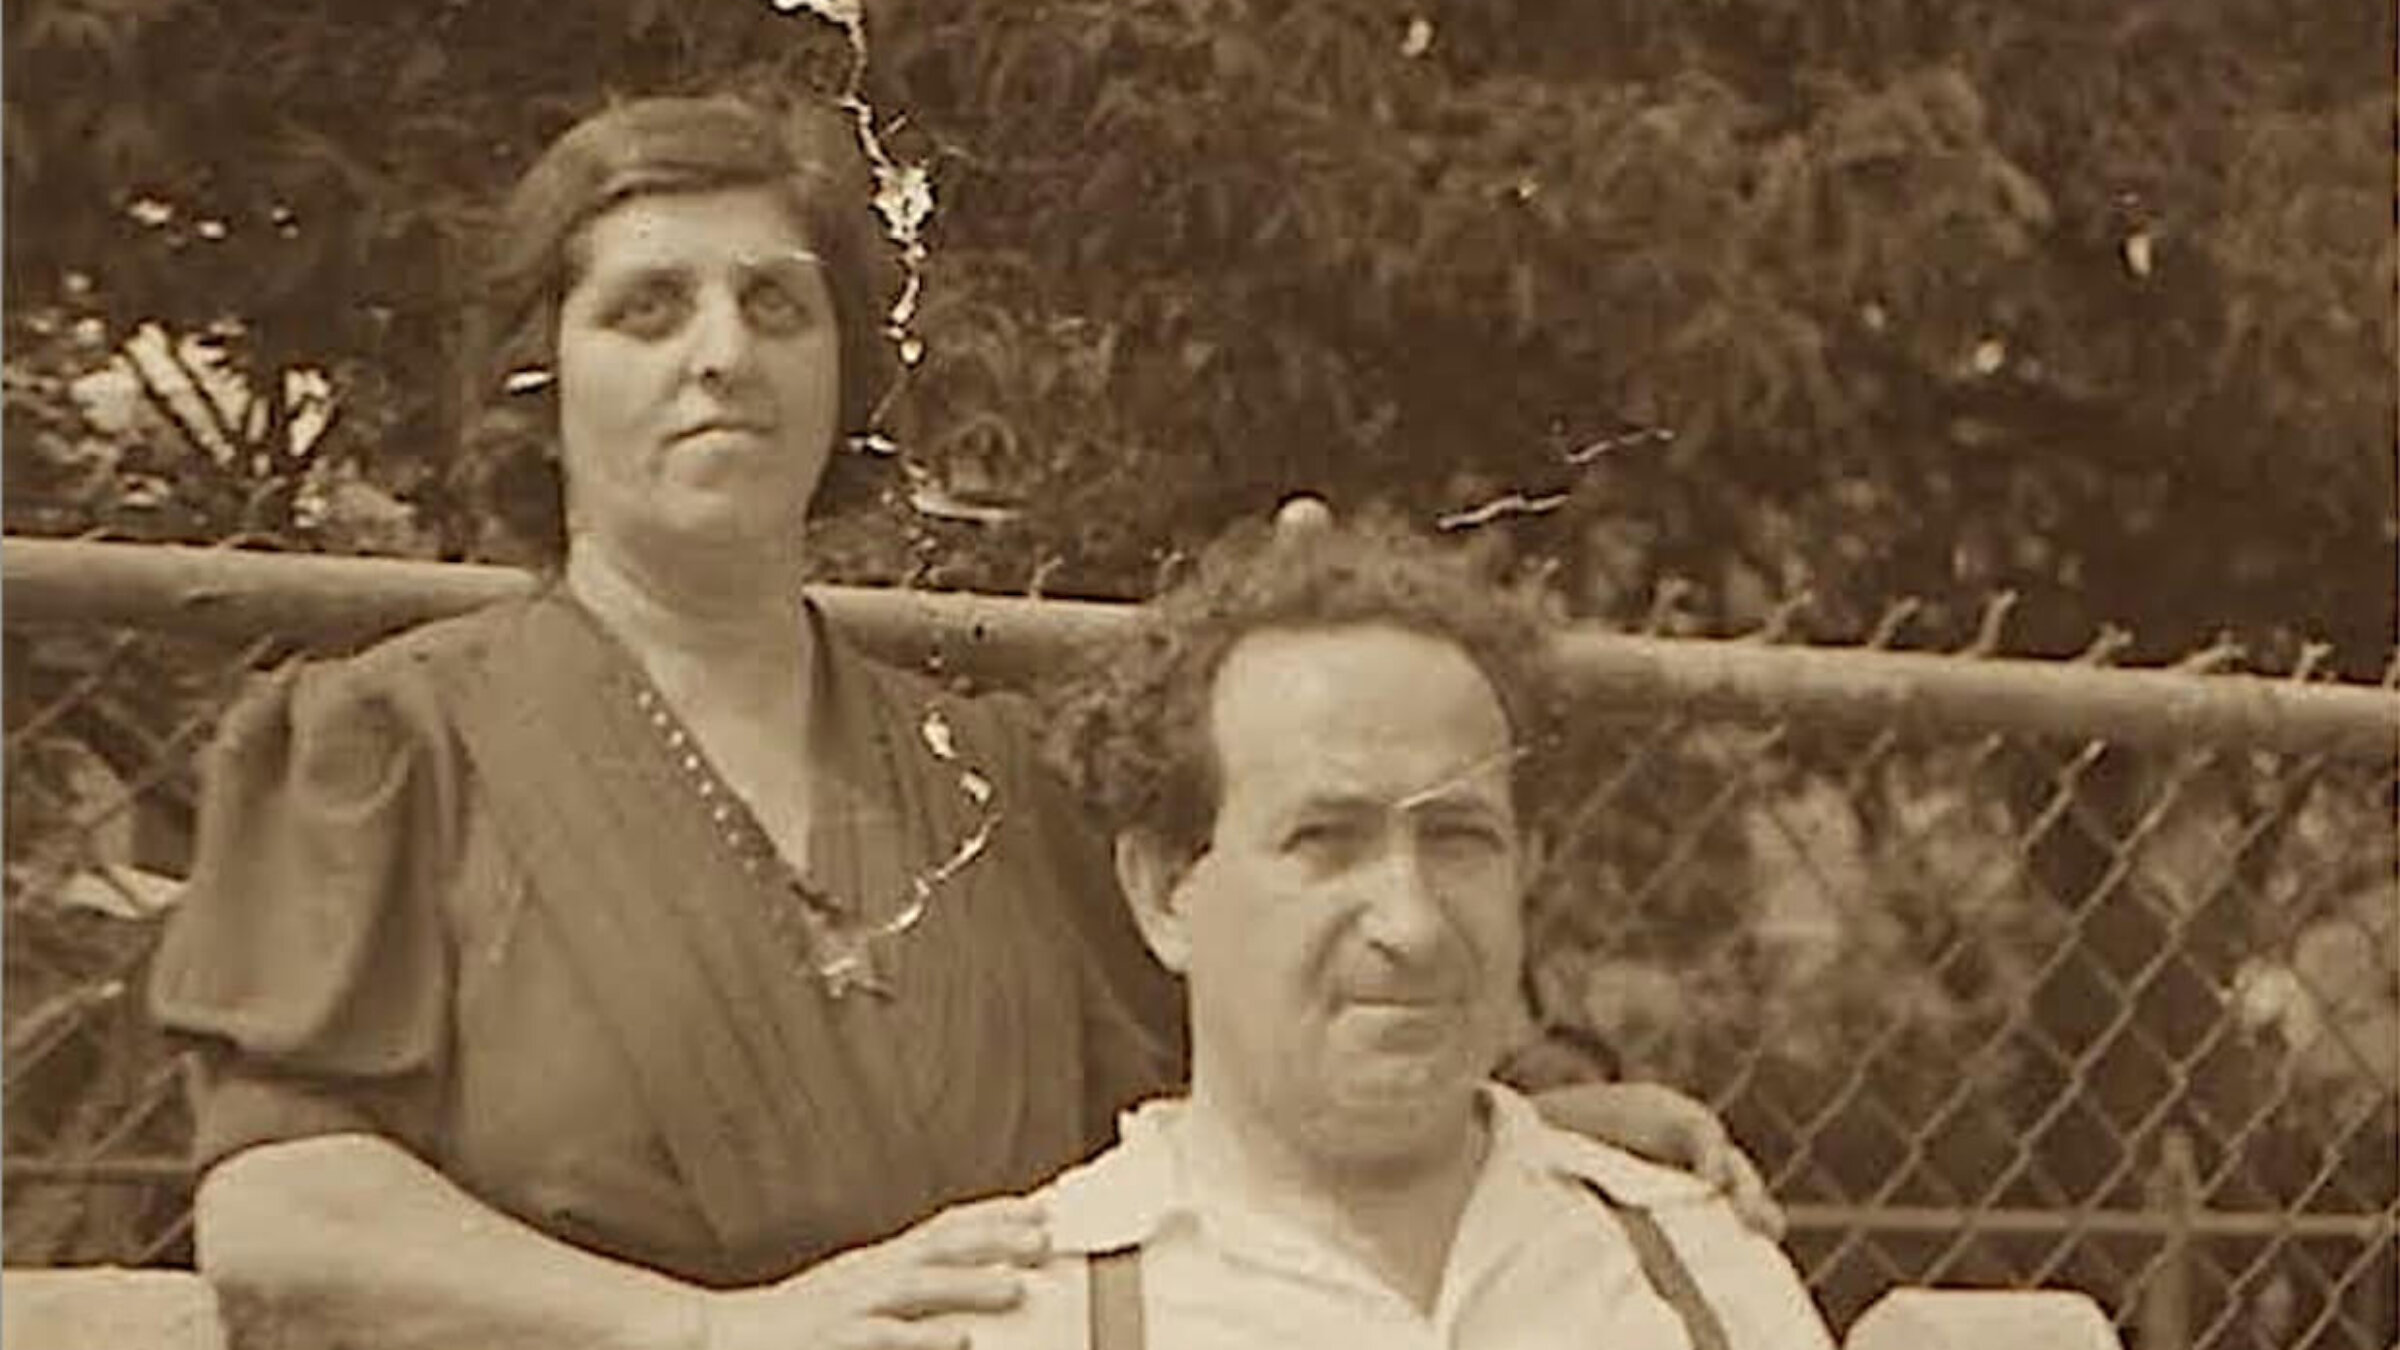 The author's grandparents, Fannie and Israel